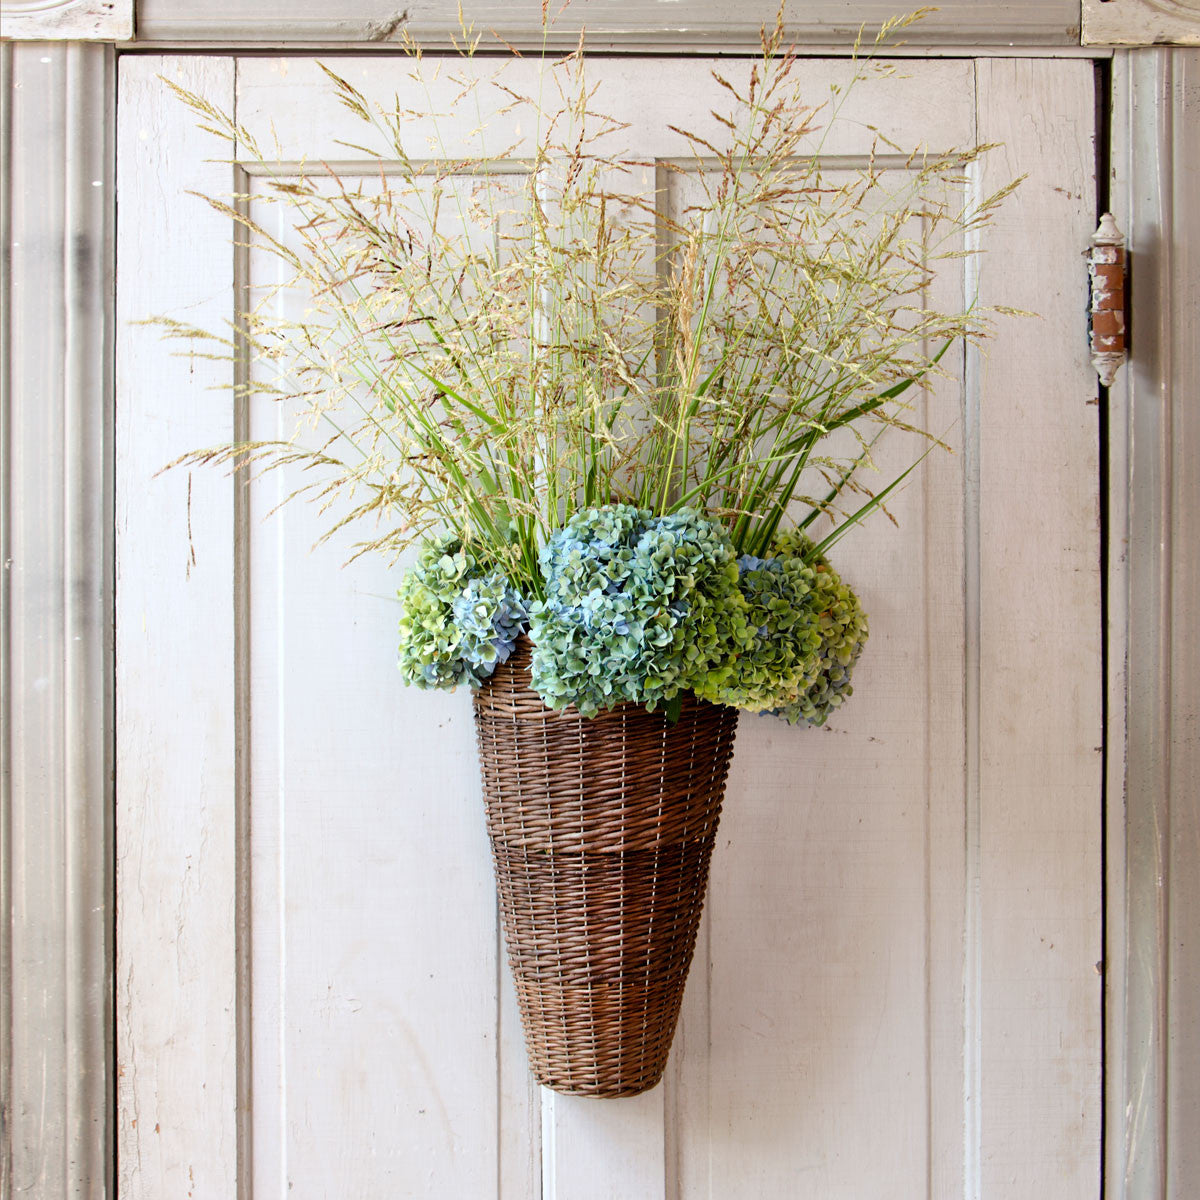 Decorative Baskets & Containers